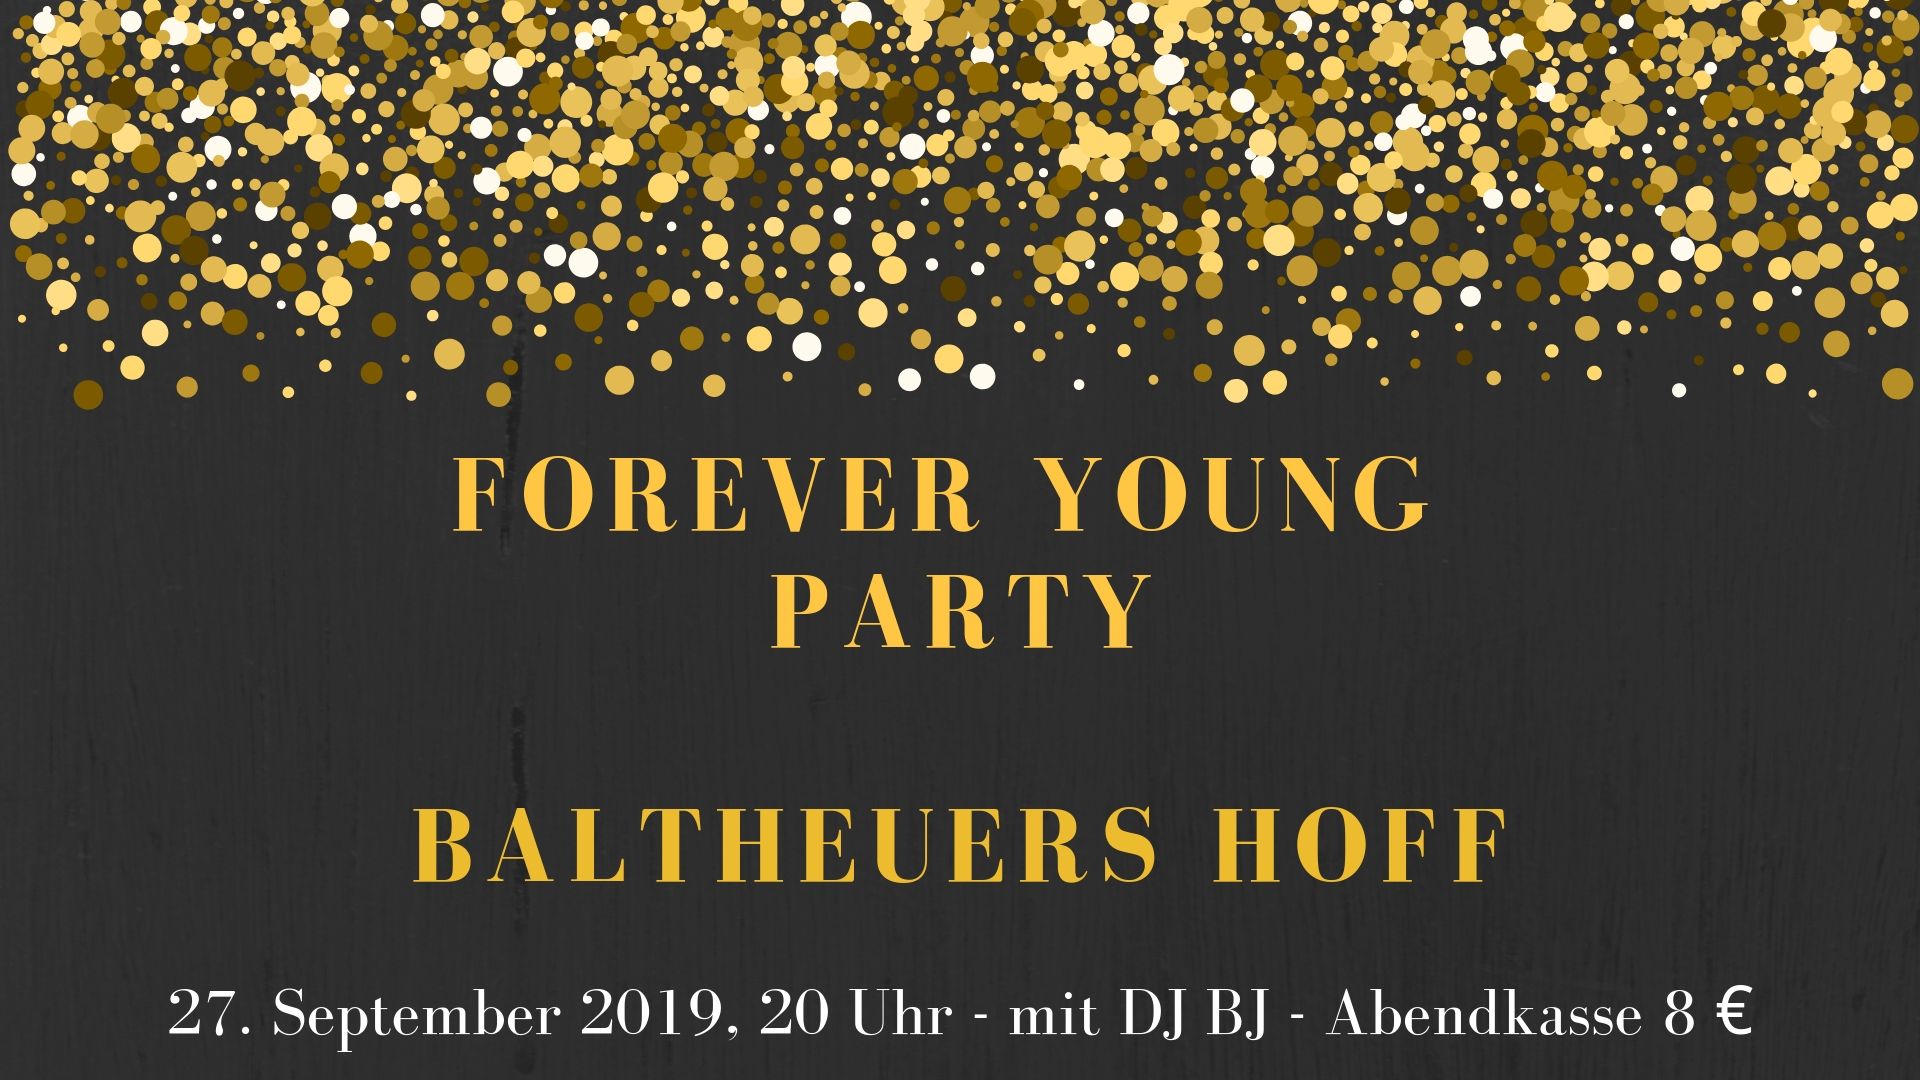 Am 27. September 2019 findet die Forever Young Party statt.